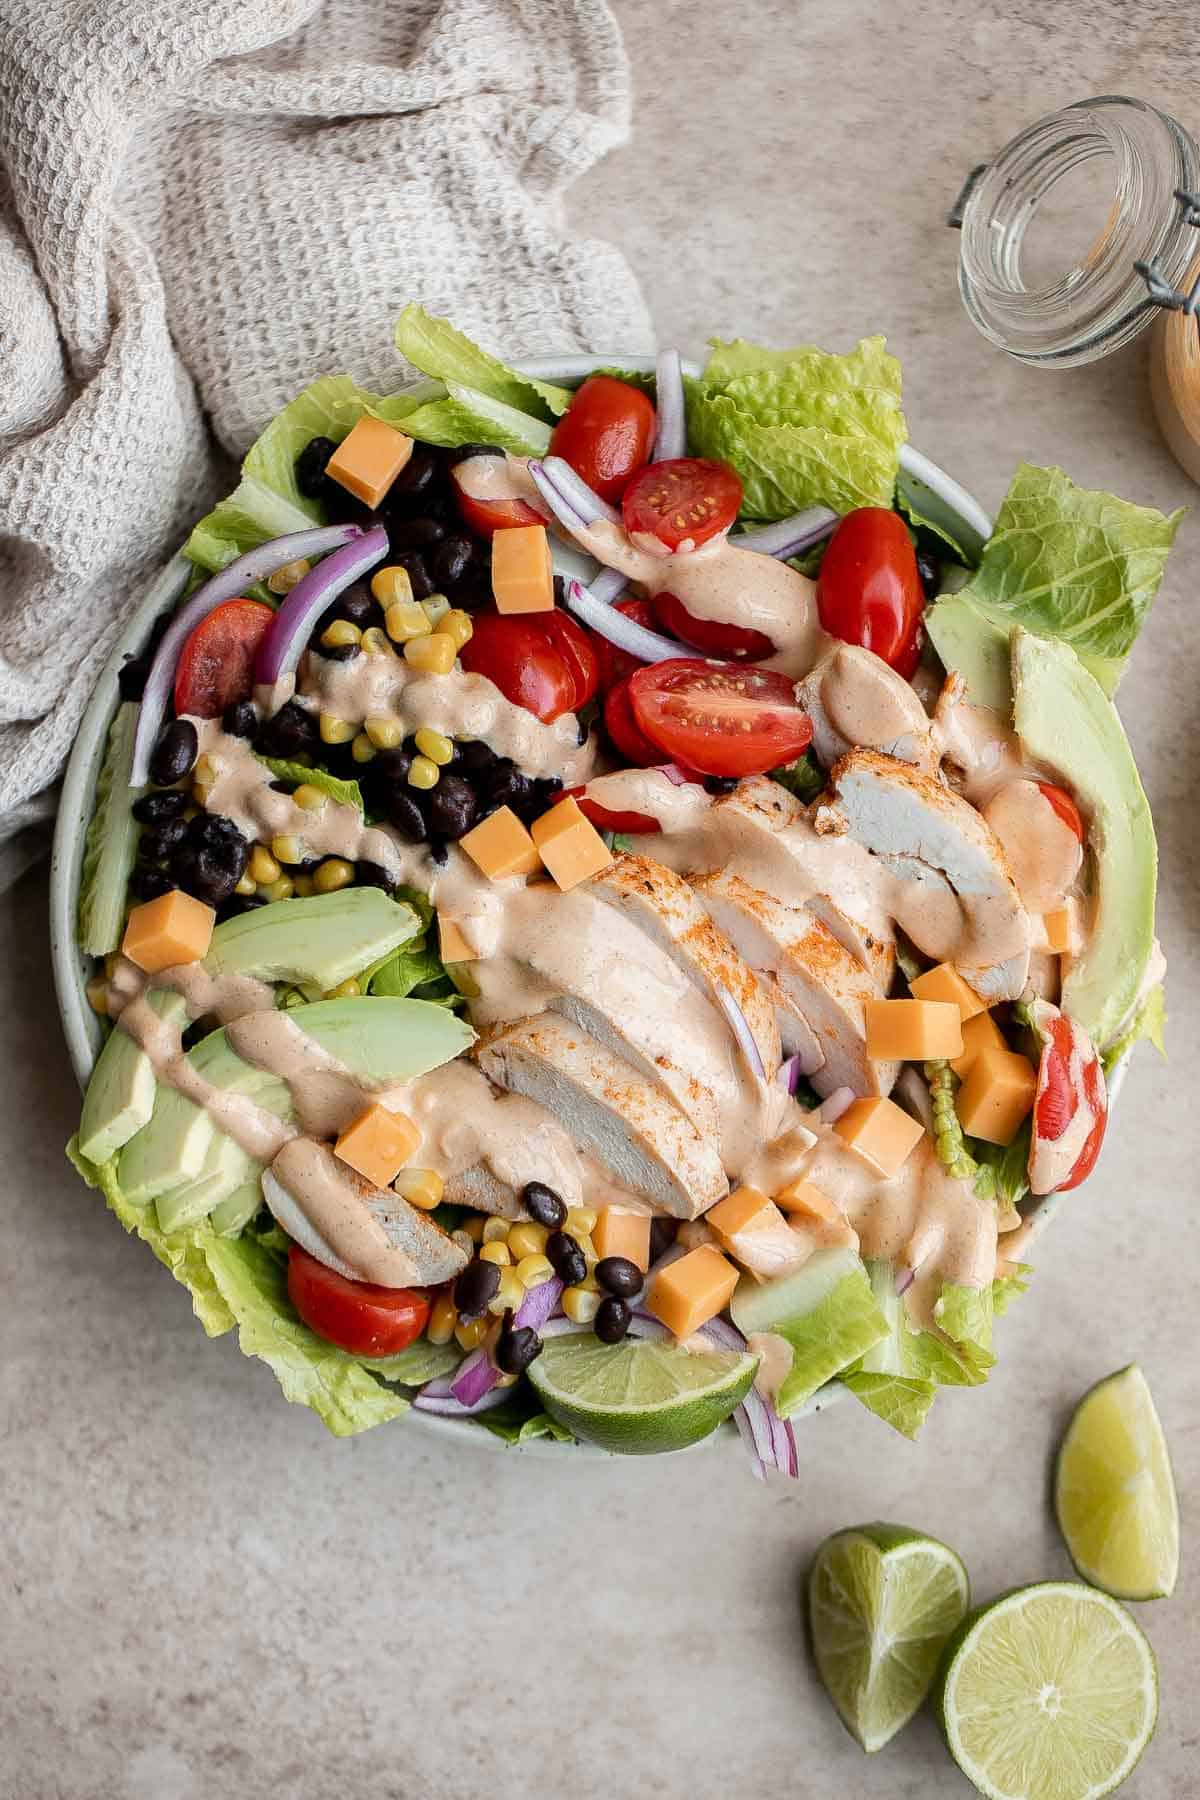 Southwest Salad is a delicious and hearty salad that is loaded with classic southwestern flavors with a Tex-Mex twist, tossed in a homemade salad dressing. | aheadofthyme.com